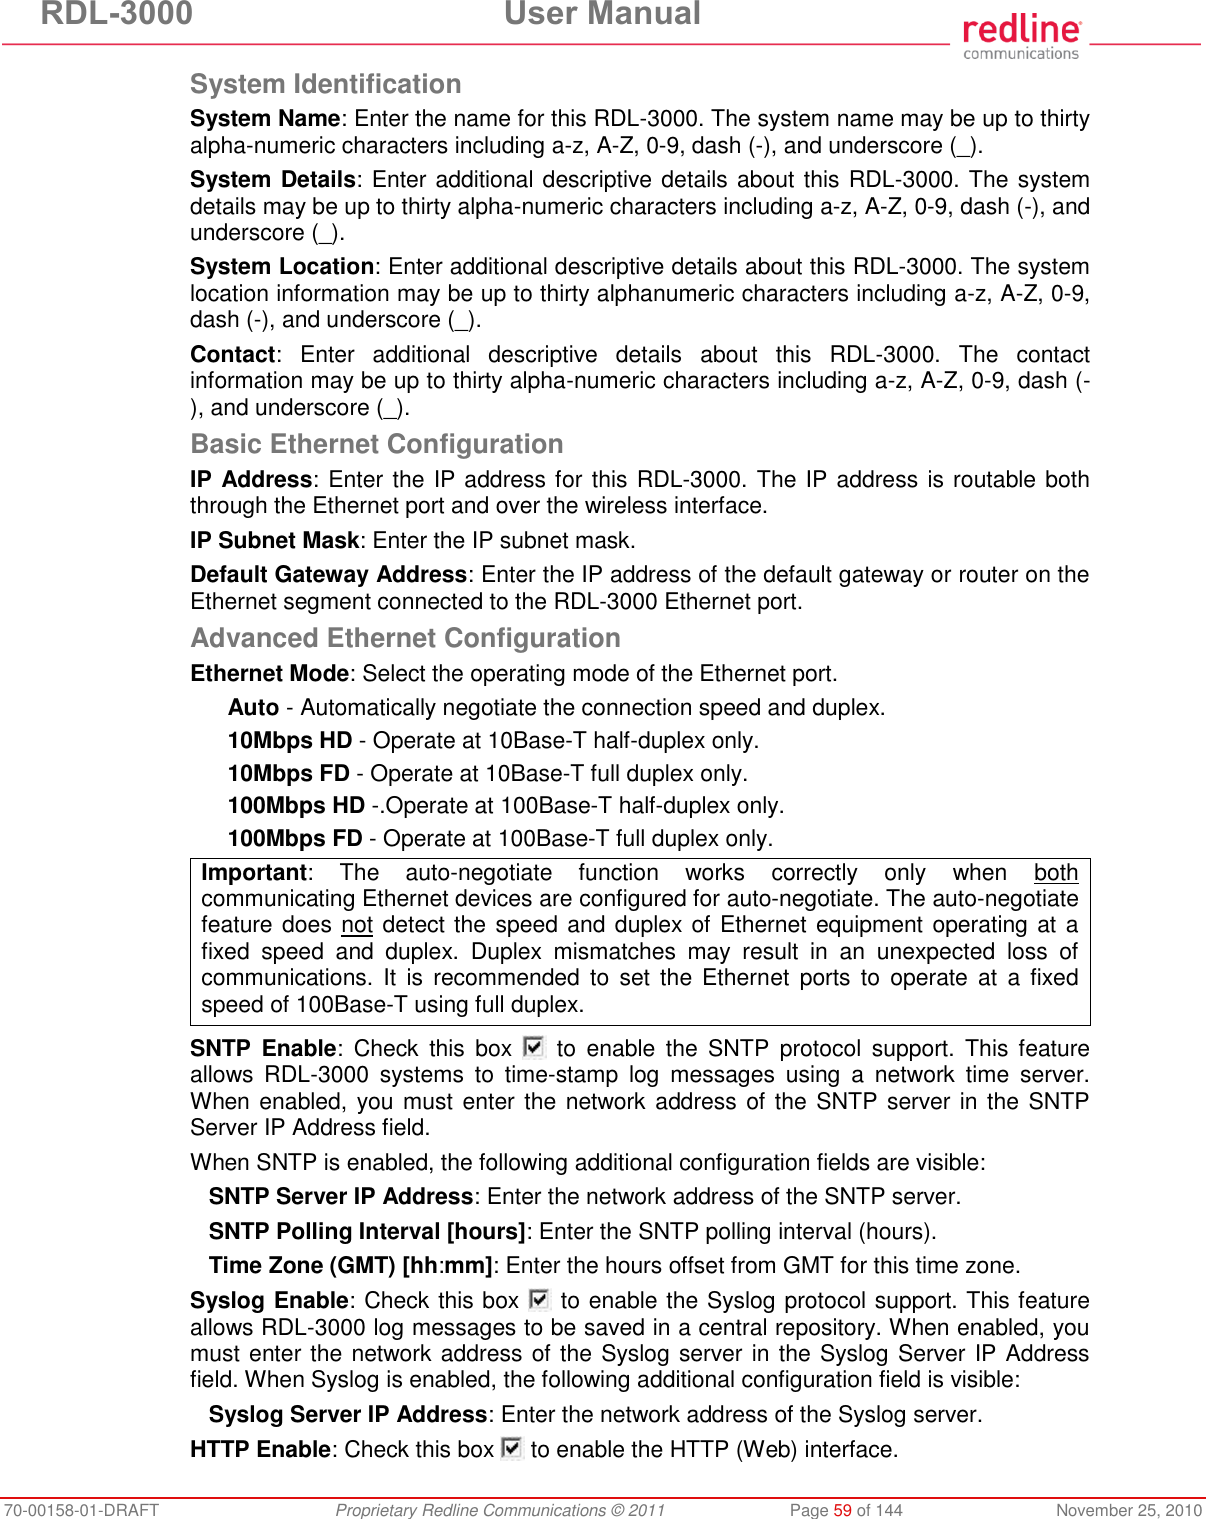 RDL-3000  User Manual 70-00158-01-DRAFT  Proprietary Redline Communications © 2011  Page 59 of 144  November 25, 2010 System Identification System Name: Enter the name for this RDL-3000. The system name may be up to thirty alpha-numeric characters including a-z, A-Z, 0-9, dash (-), and underscore (_). System Details: Enter additional descriptive details about this RDL-3000. The system details may be up to thirty alpha-numeric characters including a-z, A-Z, 0-9, dash (-), and underscore (_). System Location: Enter additional descriptive details about this RDL-3000. The system location information may be up to thirty alphanumeric characters including a-z, A-Z, 0-9, dash (-), and underscore (_). Contact:  Enter  additional  descriptive  details  about  this  RDL-3000.  The  contact information may be up to thirty alpha-numeric characters including a-z, A-Z, 0-9, dash (-), and underscore (_). Basic Ethernet Configuration IP Address: Enter the IP address for this RDL-3000. The IP address is routable both through the Ethernet port and over the wireless interface. IP Subnet Mask: Enter the IP subnet mask. Default Gateway Address: Enter the IP address of the default gateway or router on the Ethernet segment connected to the RDL-3000 Ethernet port. Advanced Ethernet Configuration Ethernet Mode: Select the operating mode of the Ethernet port. Auto - Automatically negotiate the connection speed and duplex. 10Mbps HD - Operate at 10Base-T half-duplex only. 10Mbps FD - Operate at 10Base-T full duplex only. 100Mbps HD -.Operate at 100Base-T half-duplex only. 100Mbps FD - Operate at 100Base-T full duplex only. Important:  The  auto-negotiate  function  works  correctly  only  when  both communicating Ethernet devices are configured for auto-negotiate. The auto-negotiate feature does not detect the speed and duplex of Ethernet equipment operating at a fixed  speed  and  duplex.  Duplex  mismatches  may  result  in  an  unexpected  loss  of communications. It  is  recommended  to  set  the  Ethernet  ports  to  operate  at  a  fixed speed of 100Base-T using full duplex.  SNTP  Enable:  Check  this  box    to  enable  the  SNTP  protocol  support.  This  feature allows  RDL-3000  systems  to  time-stamp  log  messages  using  a  network  time  server. When enabled, you must  enter the network address of the SNTP server in the SNTP Server IP Address field. When SNTP is enabled, the following additional configuration fields are visible: SNTP Server IP Address: Enter the network address of the SNTP server. SNTP Polling Interval [hours]: Enter the SNTP polling interval (hours). Time Zone (GMT) [hh:mm]: Enter the hours offset from GMT for this time zone. Syslog Enable: Check this box   to enable the Syslog protocol support. This feature allows RDL-3000 log messages to be saved in a central repository. When enabled, you must enter the network address of the Syslog server in the Syslog Server IP Address field. When Syslog is enabled, the following additional configuration field is visible: Syslog Server IP Address: Enter the network address of the Syslog server. HTTP Enable: Check this box   to enable the HTTP (Web) interface. 